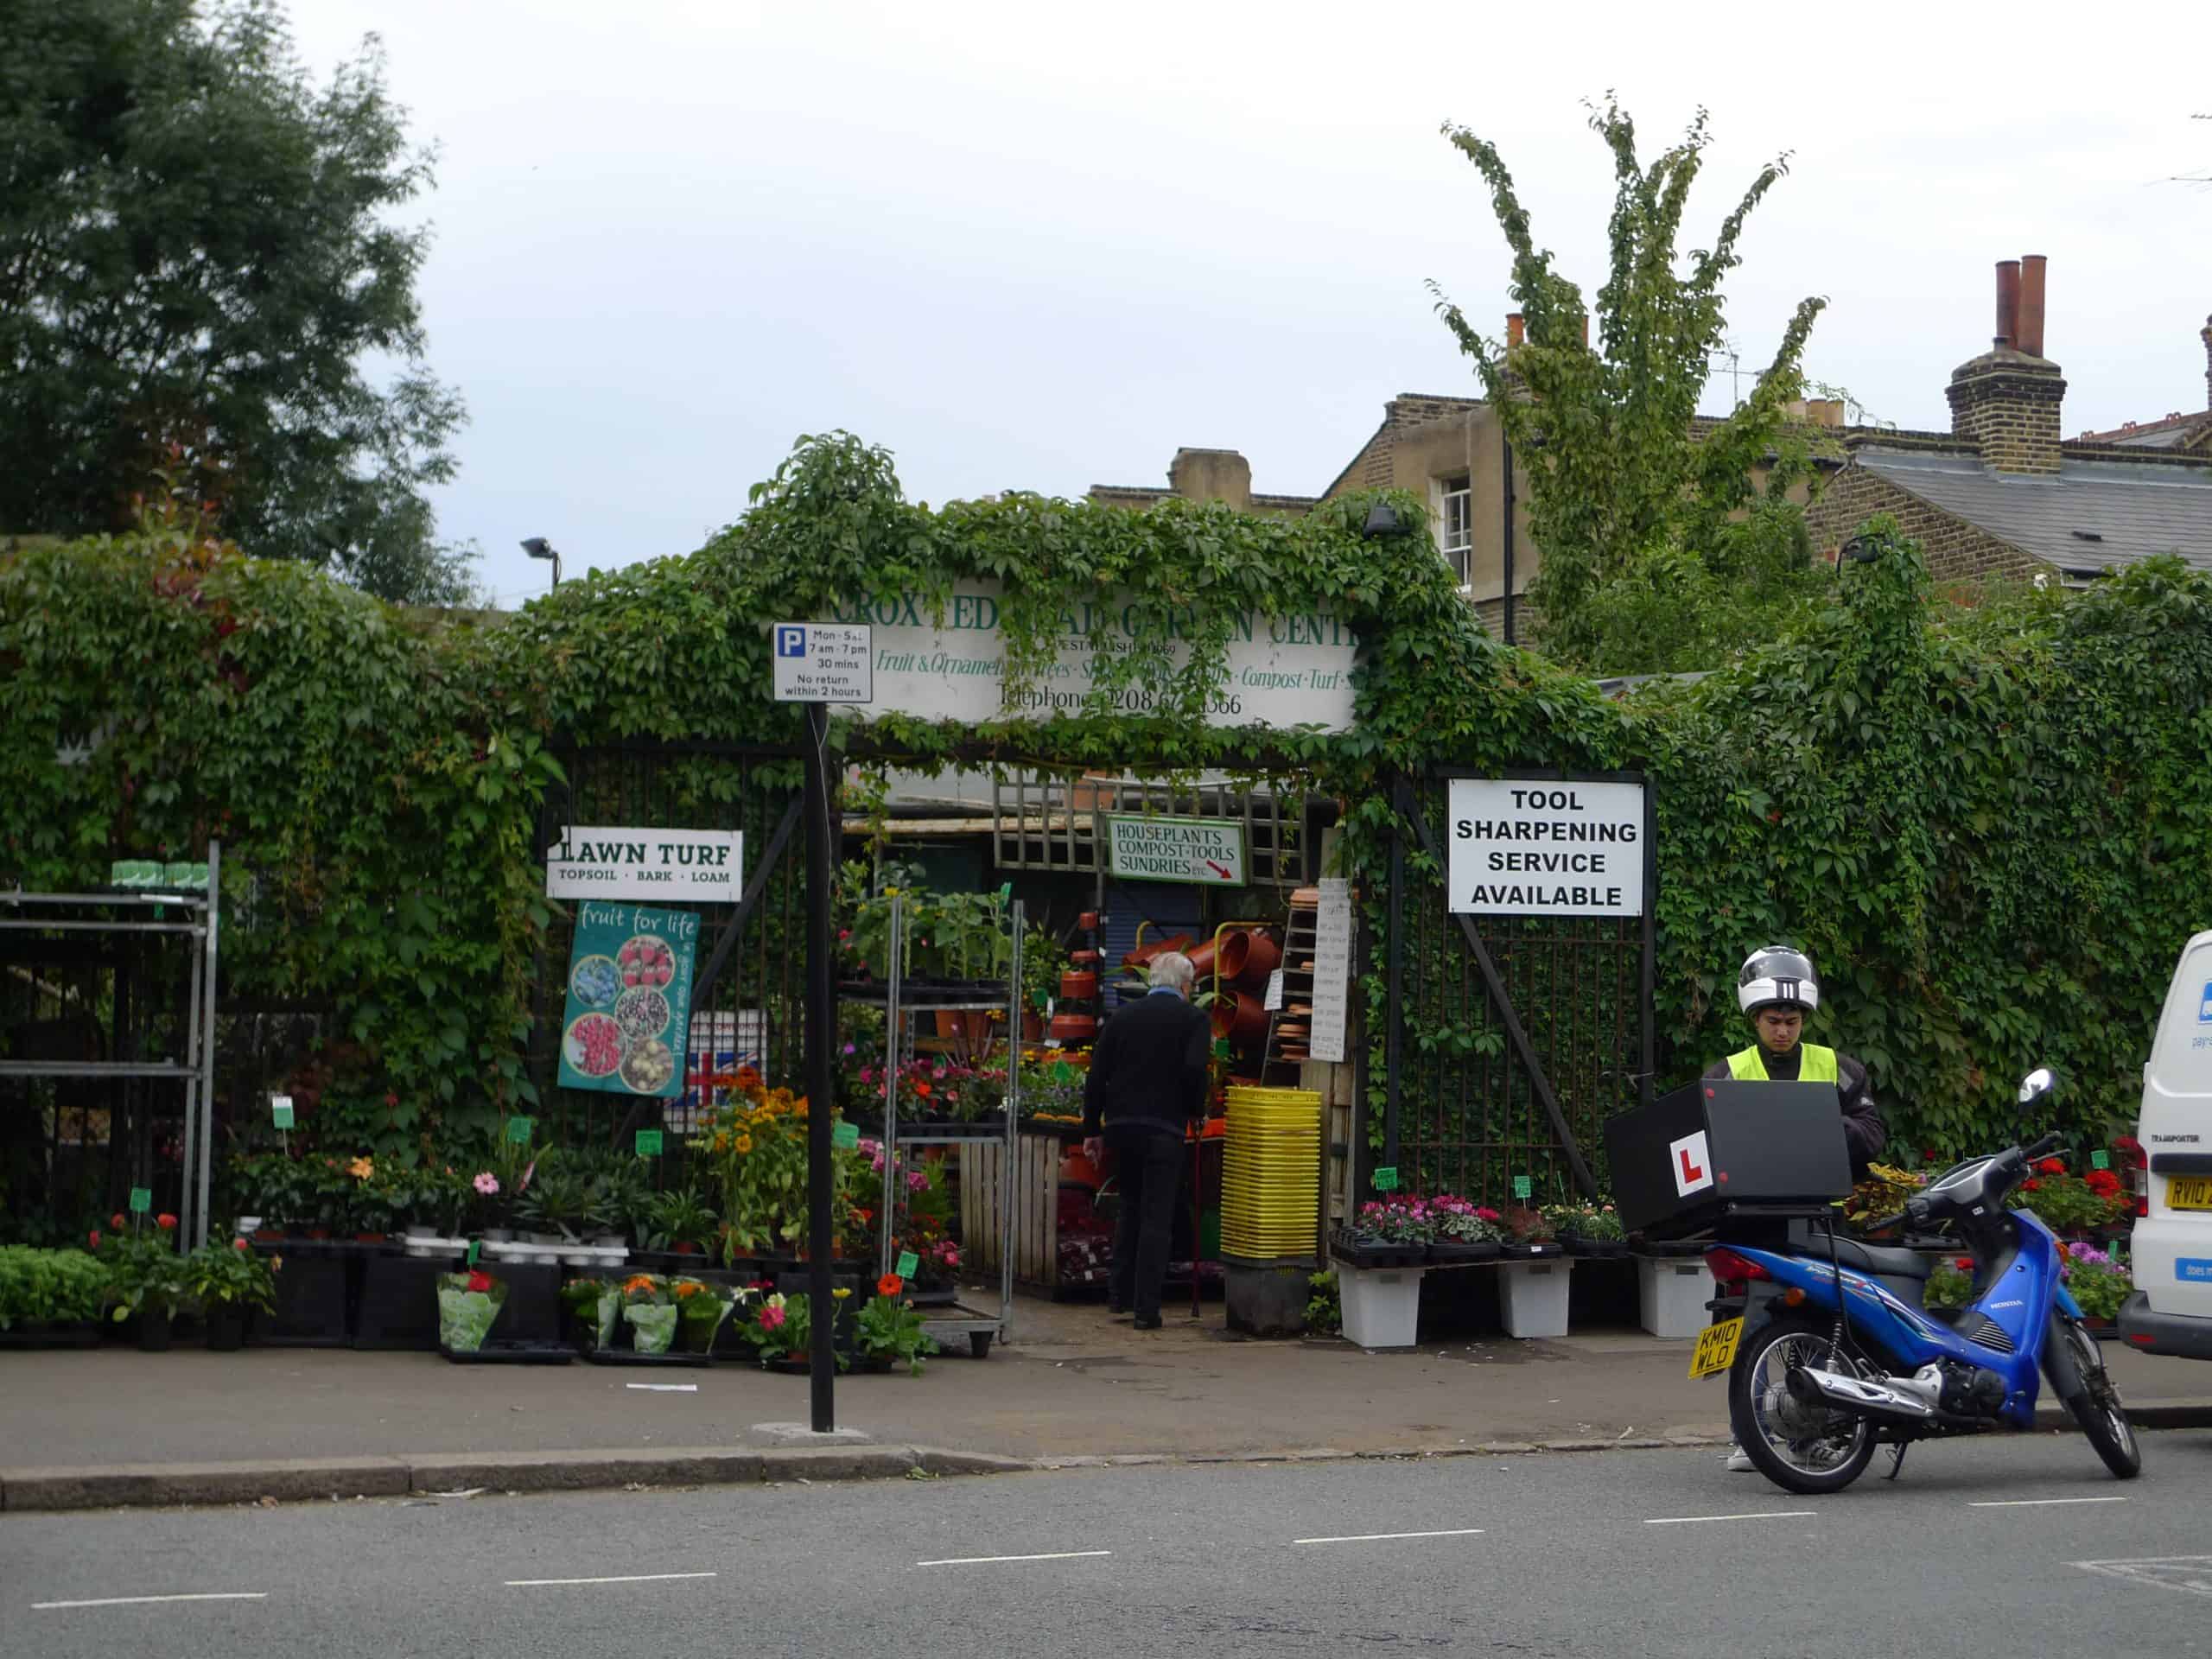 Croxted Road Garden Centre